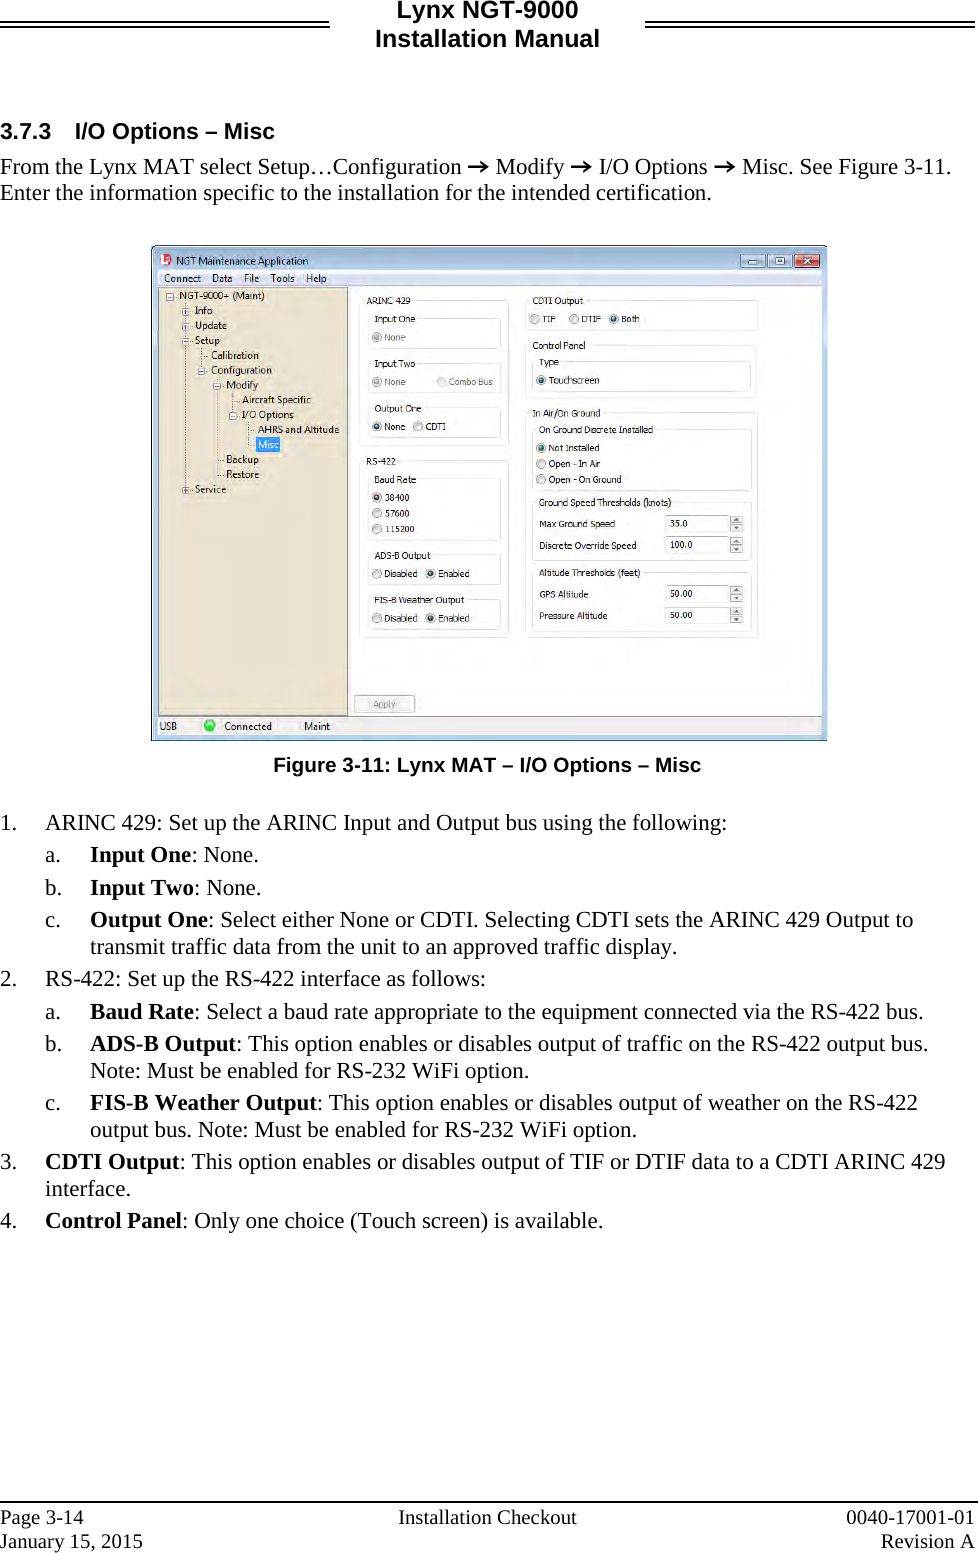 Lynx NGT-9000 Installation Manual   3.7.3 I/O Options – Misc From the Lynx MAT select Setup…Configuration Z Modify Z I/O Options Z Misc. See Figure 3-11. Enter the information specific to the installation for the intended certification.    Figure 3-11: Lynx MAT – I/O Options – Misc  1. ARINC 429: Set up the ARINC Input and Output bus using the following: a. Input One: None.  b. Input Two: None. c. Output One: Select either None or CDTI. Selecting CDTI sets the ARINC 429 Output to transmit traffic data from the unit to an approved traffic display.  2. RS-422: Set up the RS-422 interface as follows: a. Baud Rate: Select a baud rate appropriate to the equipment connected via the RS-422 bus.  b. ADS-B Output: This option enables or disables output of traffic on the RS-422 output bus. Note: Must be enabled for RS-232 WiFi option. c. FIS-B Weather Output: This option enables or disables output of weather on the RS-422 output bus. Note: Must be enabled for RS-232 WiFi option. 3. CDTI Output: This option enables or disables output of TIF or DTIF data to a CDTI ARINC 429 interface. 4. Control Panel: Only one choice (Touch screen) is available.     Page 3-14   Installation Checkout 0040-17001-01 January 15, 2015    Revision A  